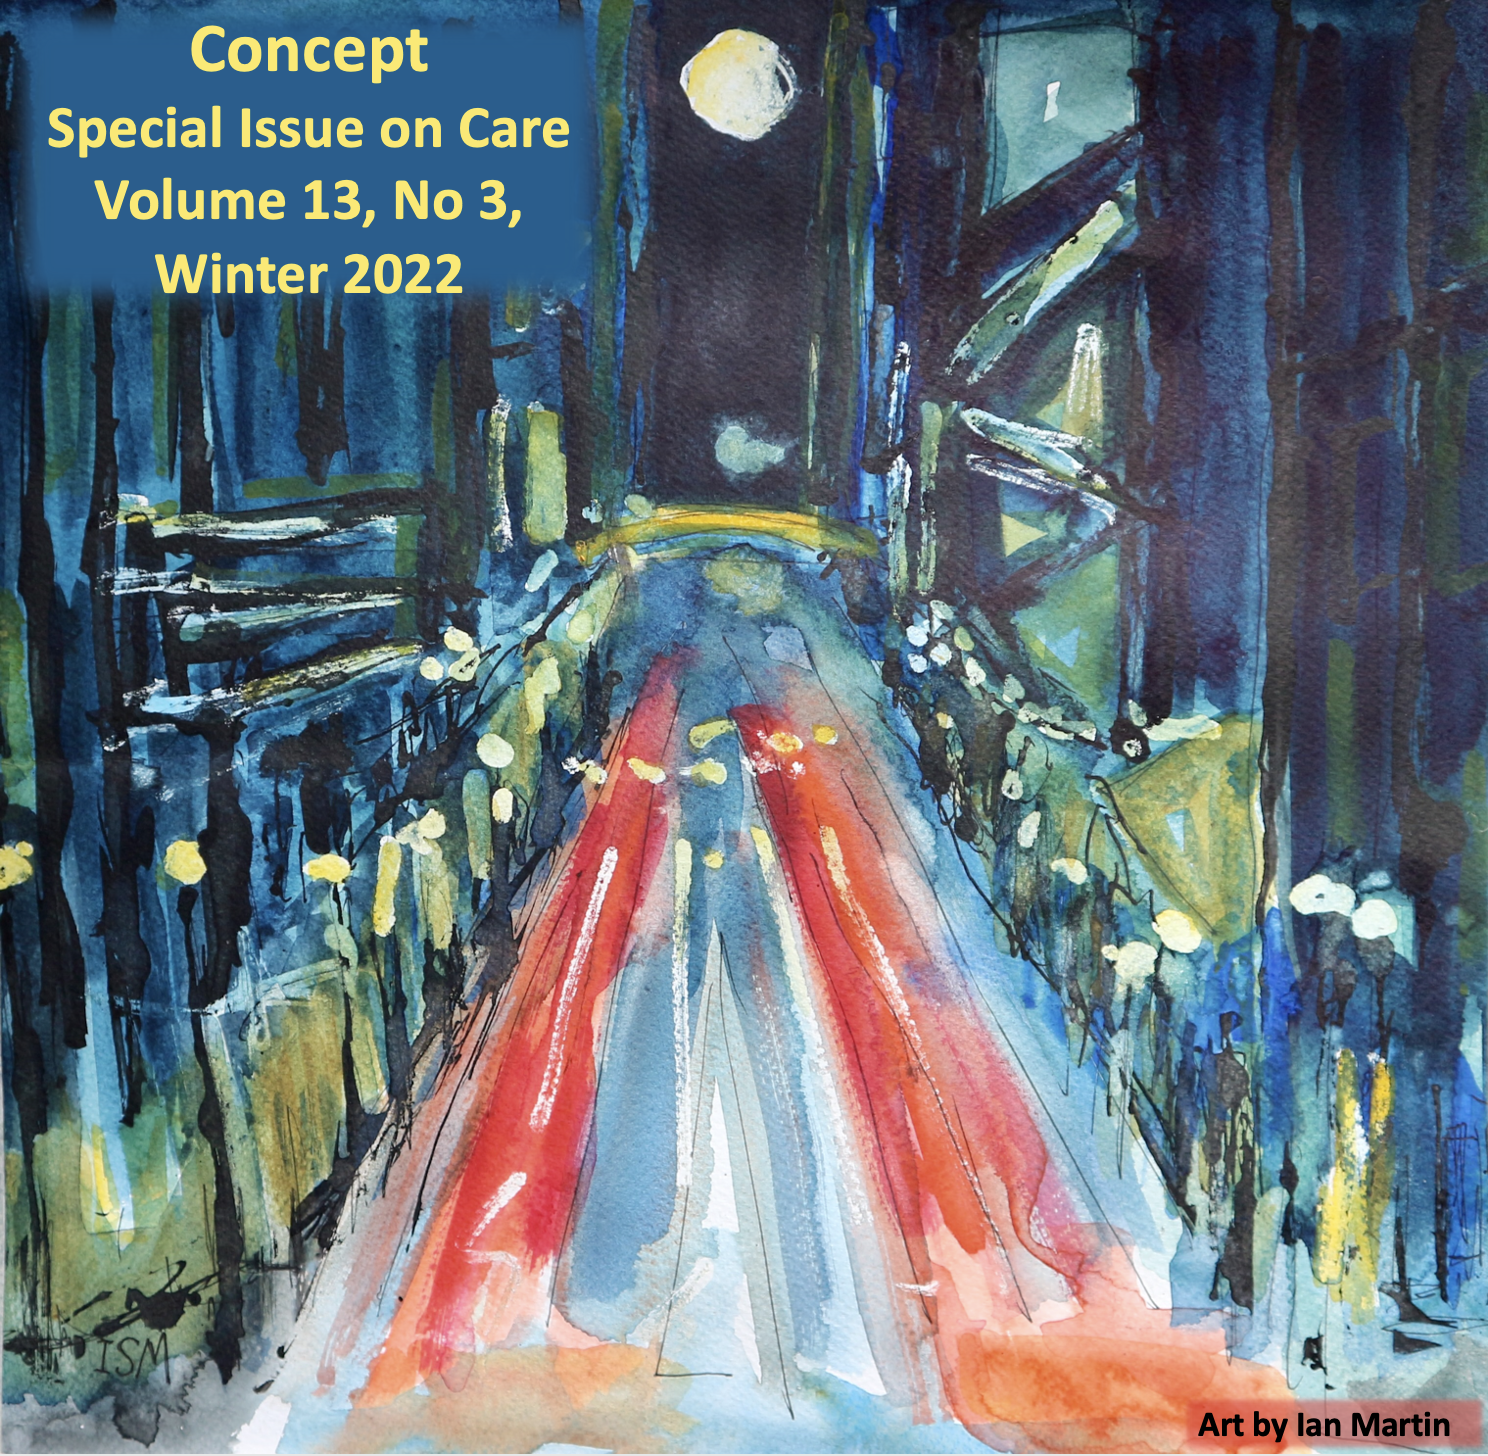 Abstract painting of a city street at night. The text reads "Concept Special Issue on Care Volume 13, No 3, Winter 2022